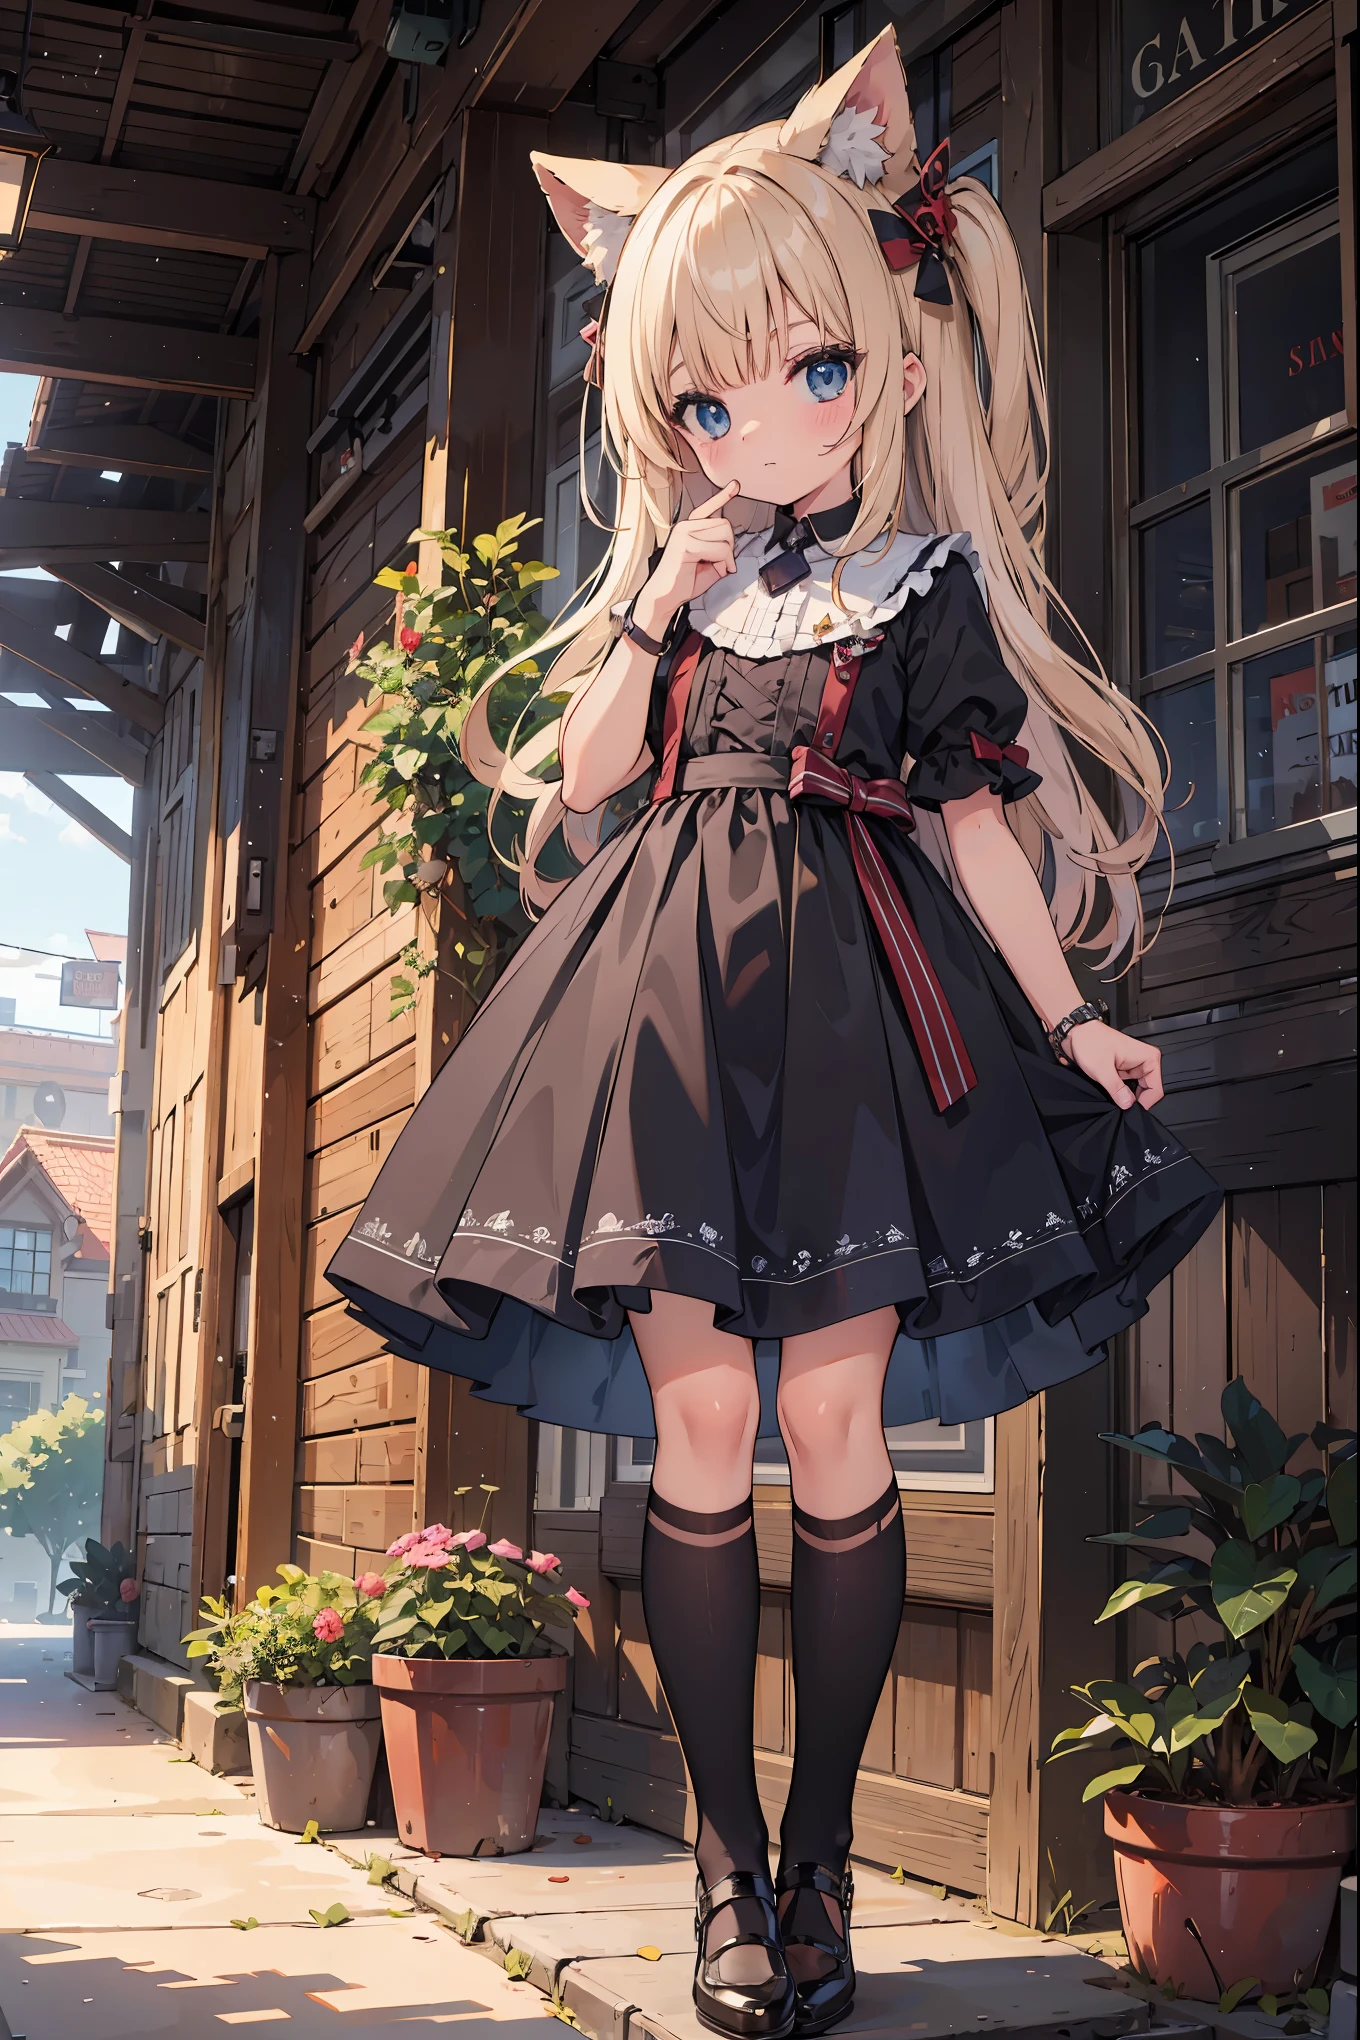 absurd, absolute resolution, incredibly absurd, super high quality, super detailed, official art, unity 8k wall, masterpiece
BREAK
One , innocent, little devil, small and young toddler, blush